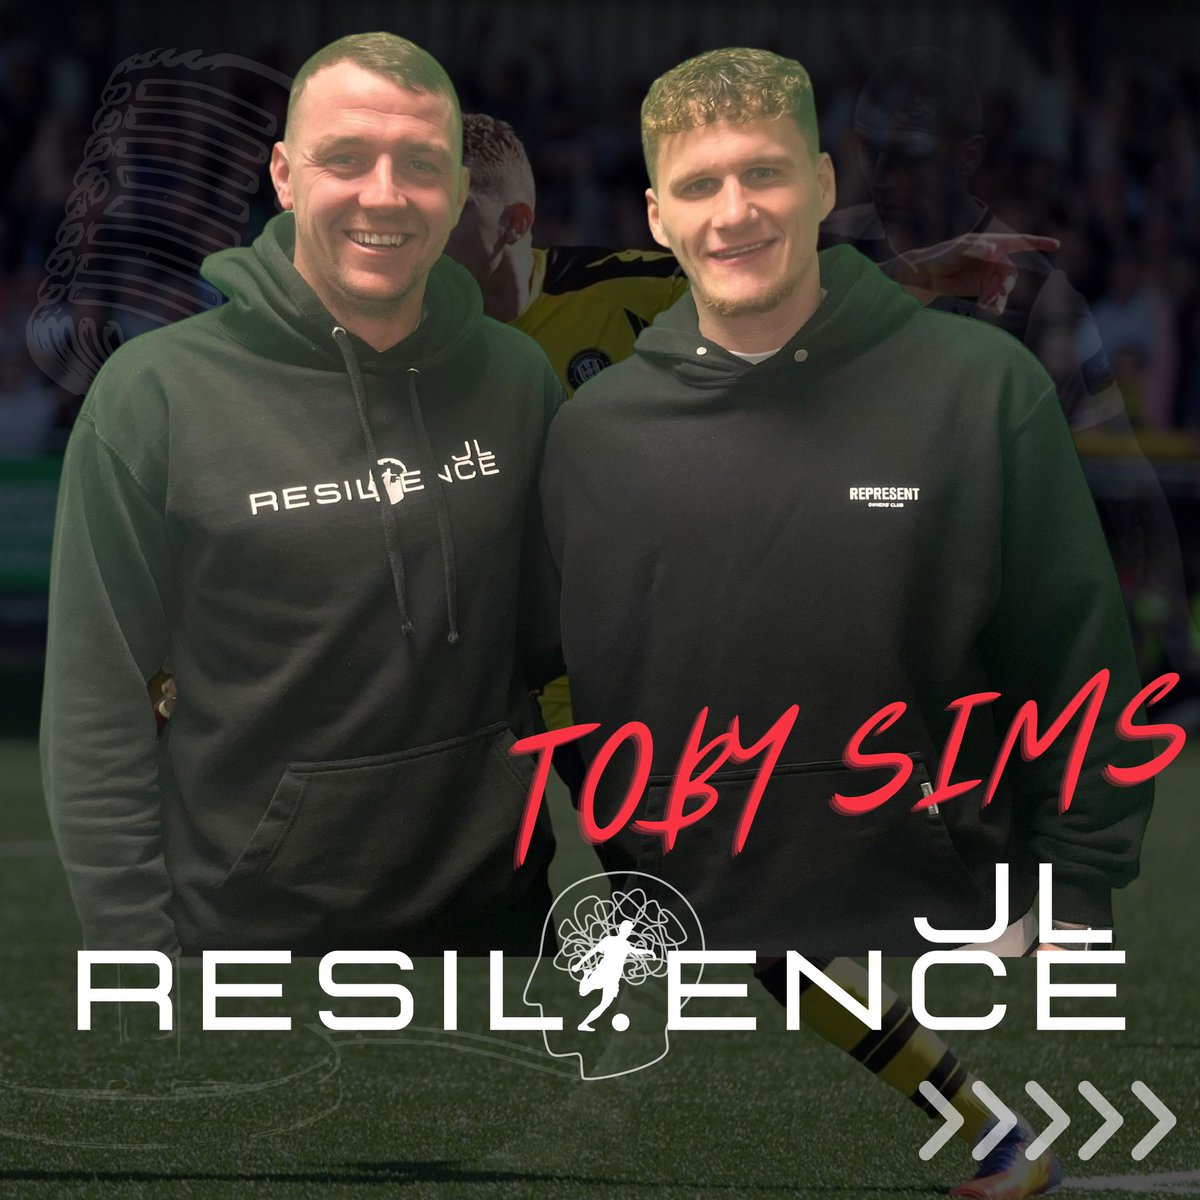 JL RESILIENCE X TOBY SIMS🙌 Was fantastic to catch up with close friends of JLResilience Toby Sims, Toby is still at Harrogate Town and has had to deal with multiple set backs this season with injuries, but is now back ready to have a fantastic season next year! #tobysims